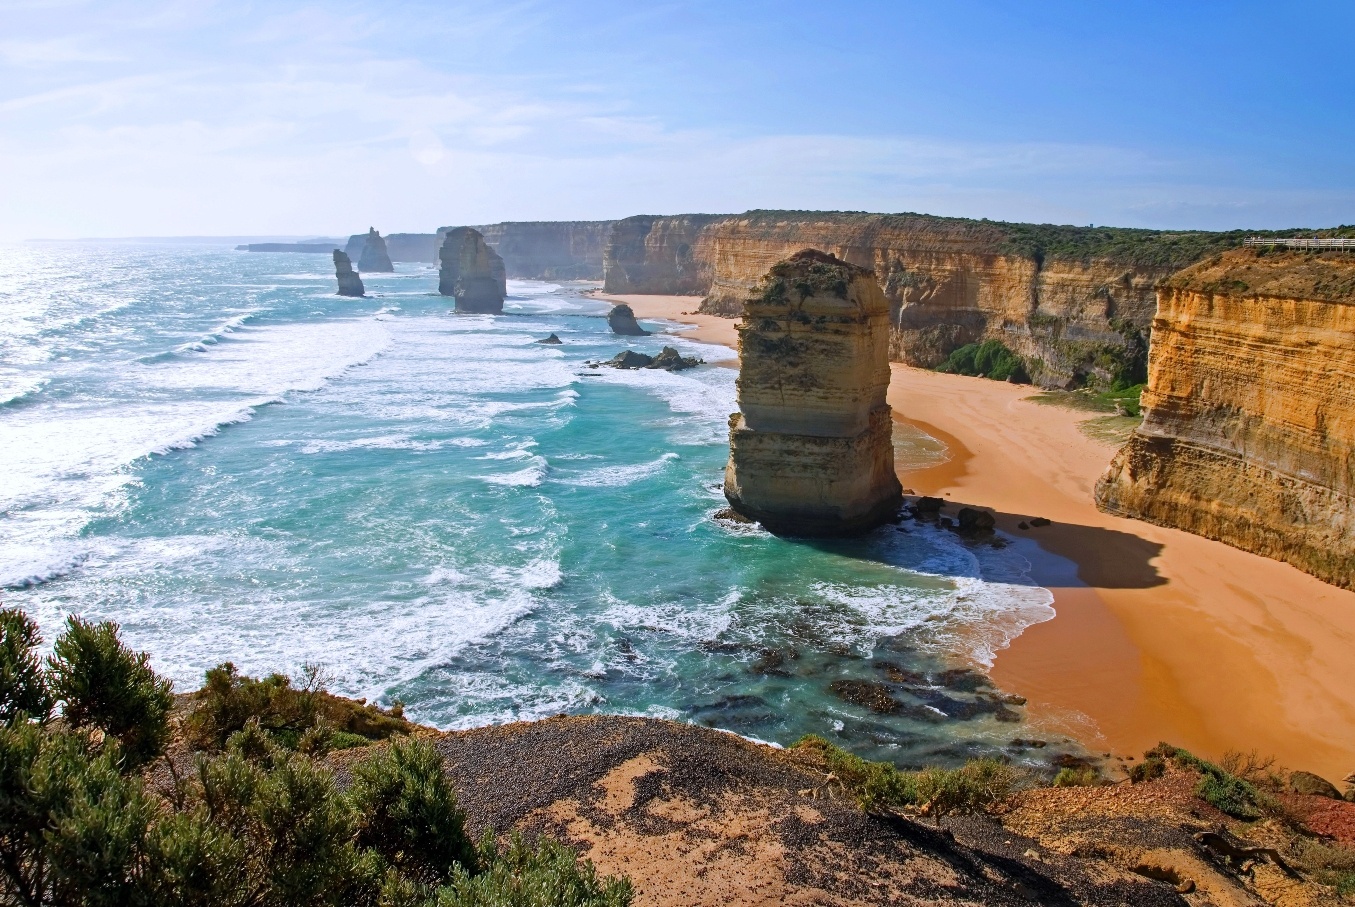 1-Day Tour to Come and Explore Victoria’s Surf Coast and More Must-see Destinations Near Melbourne 